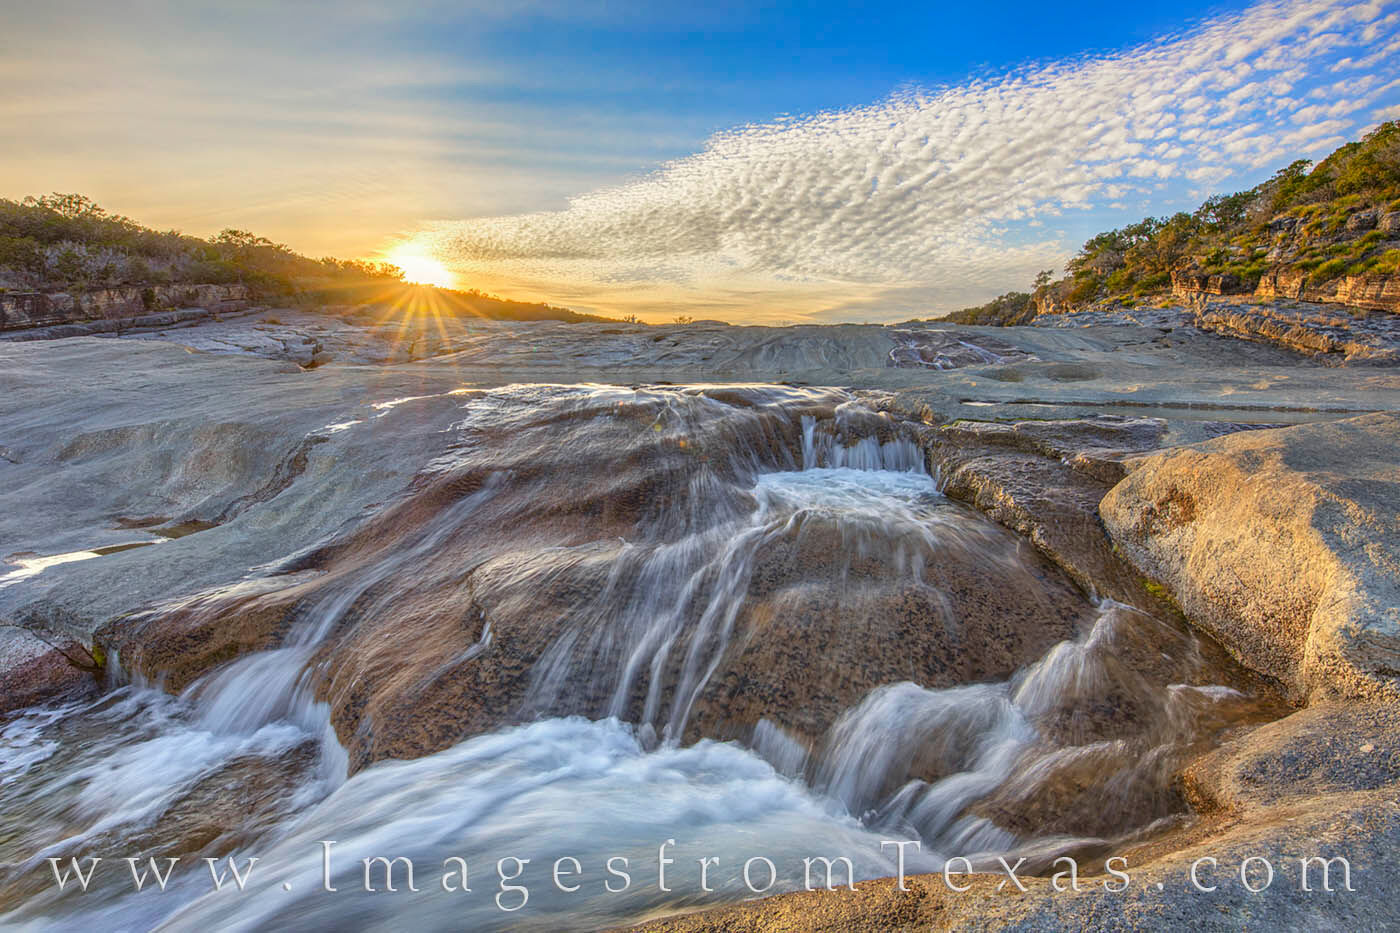 Sunset at Pedernales Falls was beautiful on this evening. Cold, clear water rushed over the limestone rocks, the rays of the...